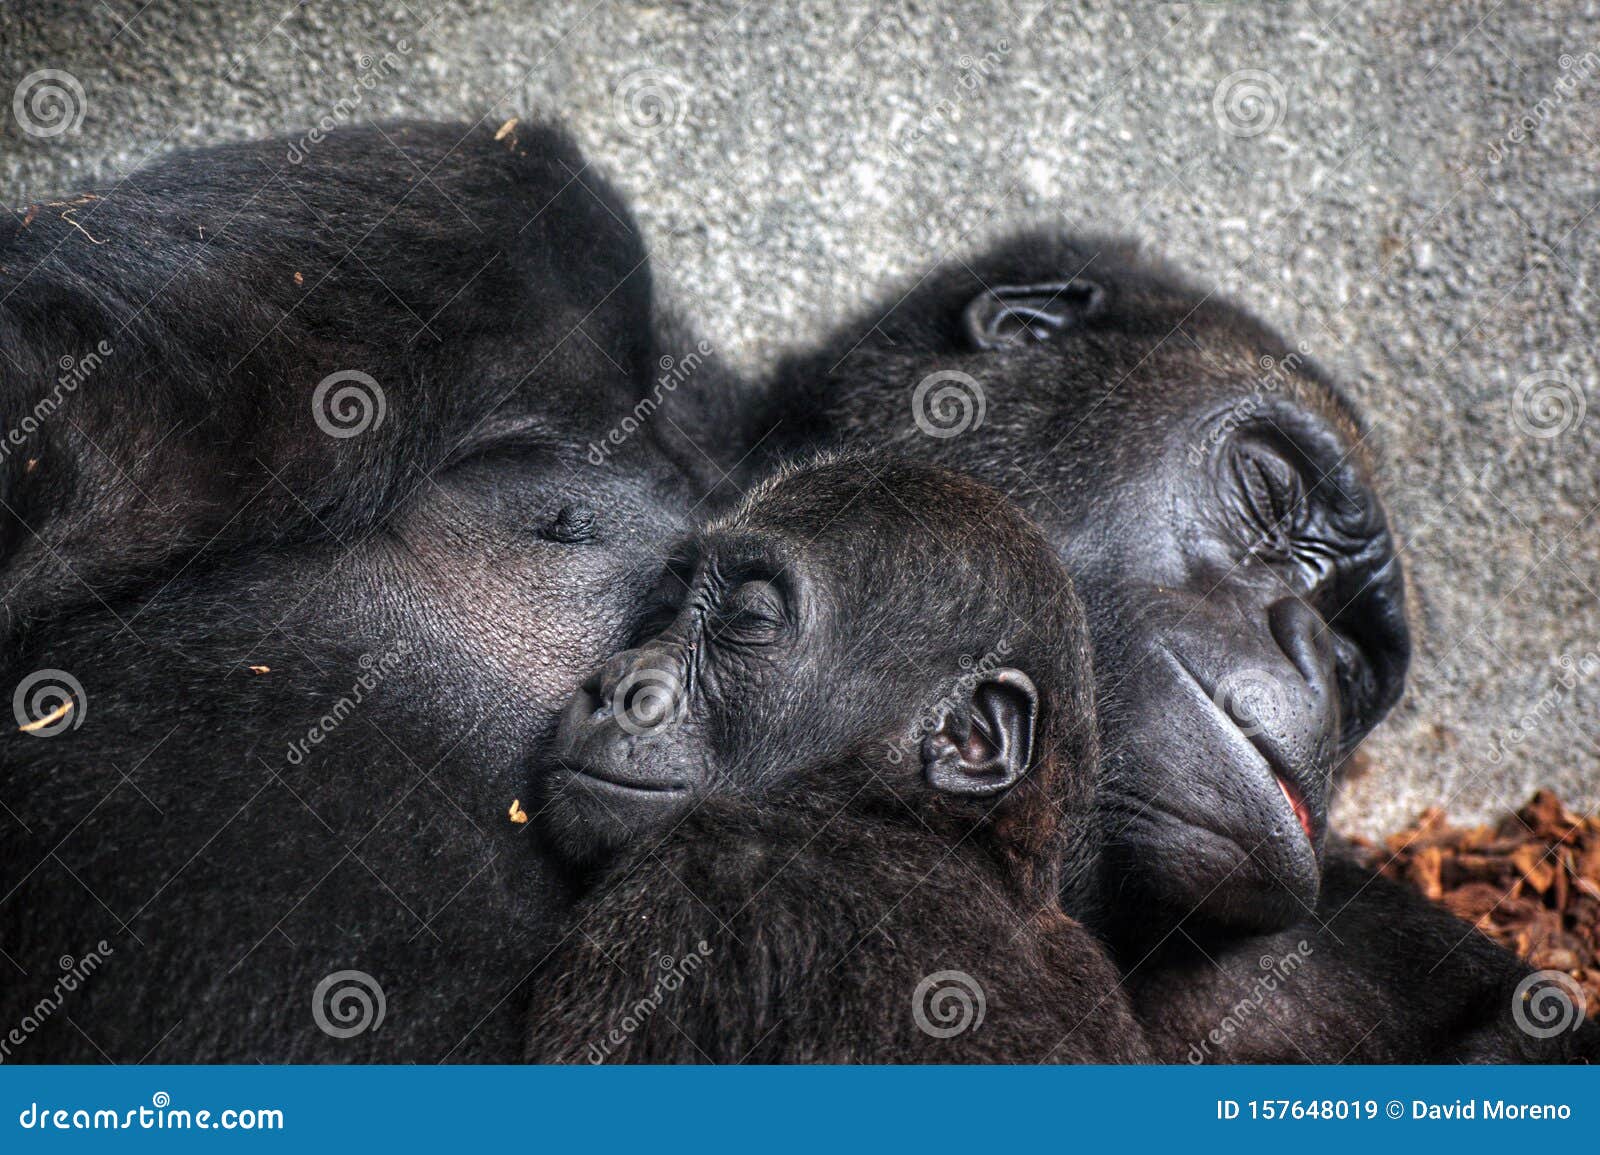 baby chimpanzee sleeping at his mother chest